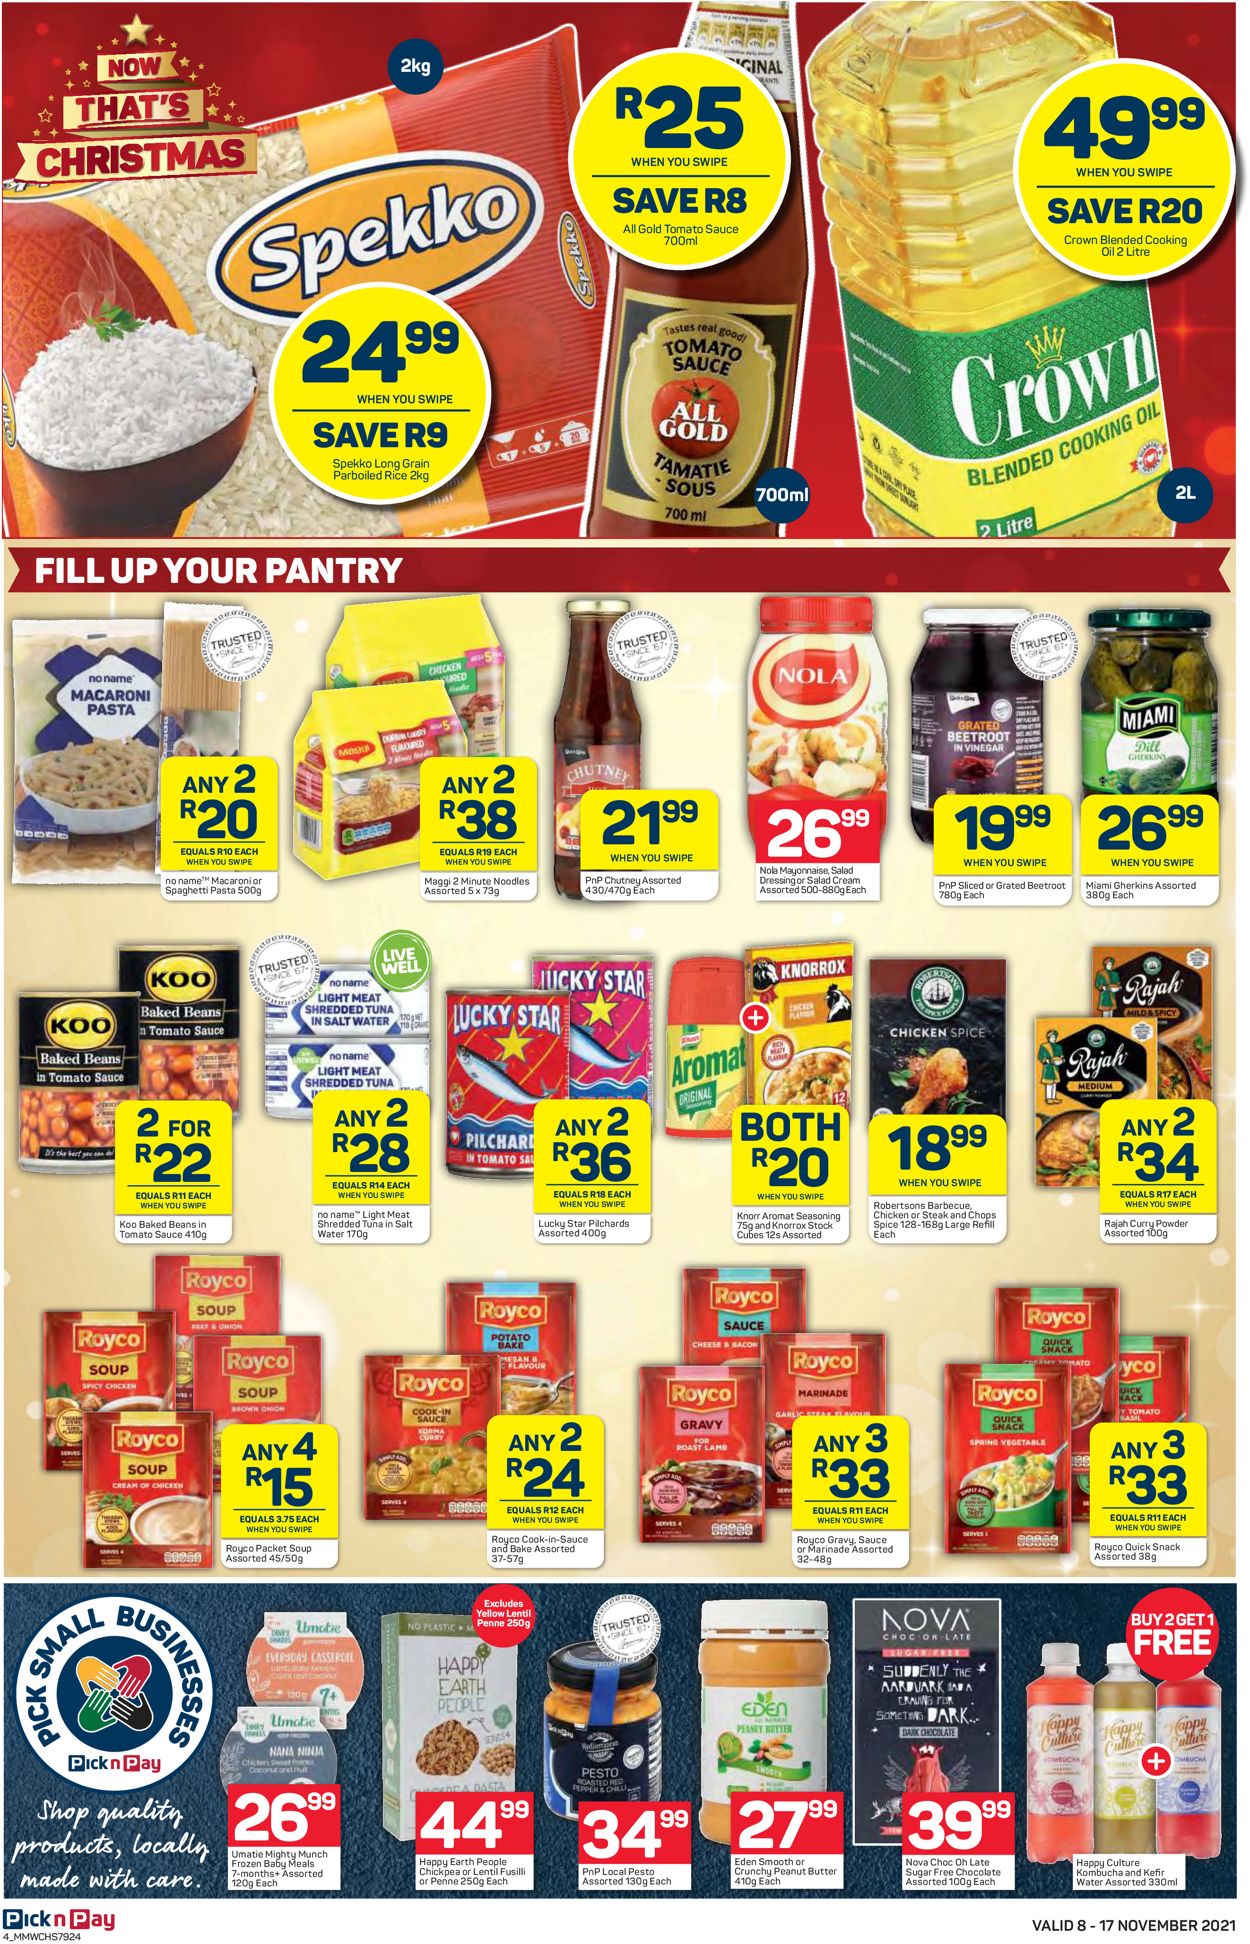 Pick n Pay Catalogue - 2021/11/08-2021/11/17 (Page 4)